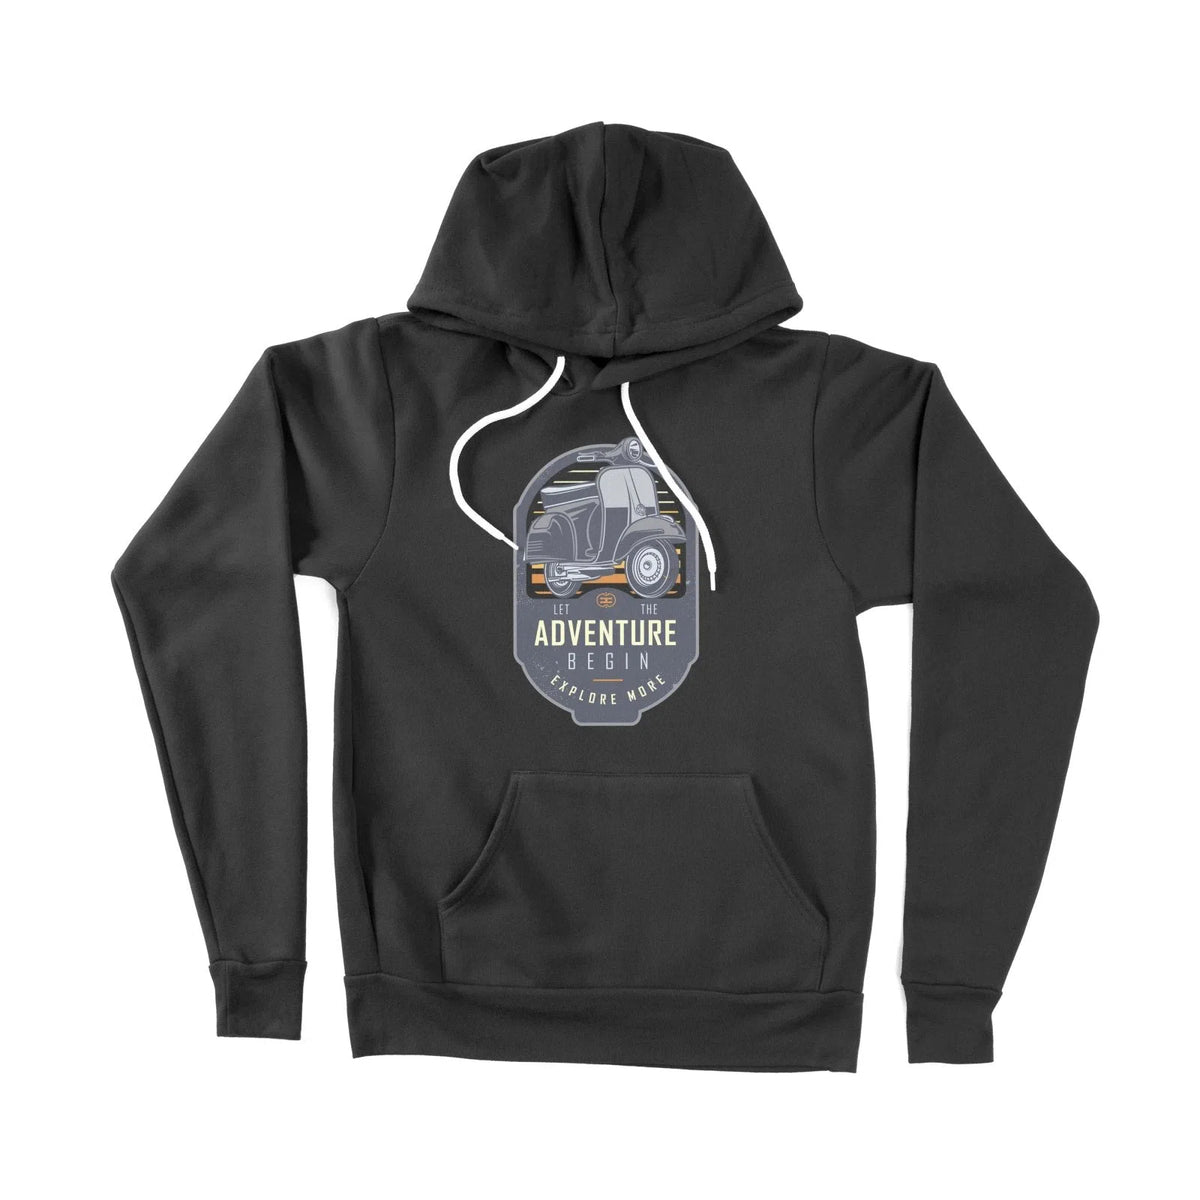 Let The Adventure Begin Unisex Adult Hoodie Chroma Clothing